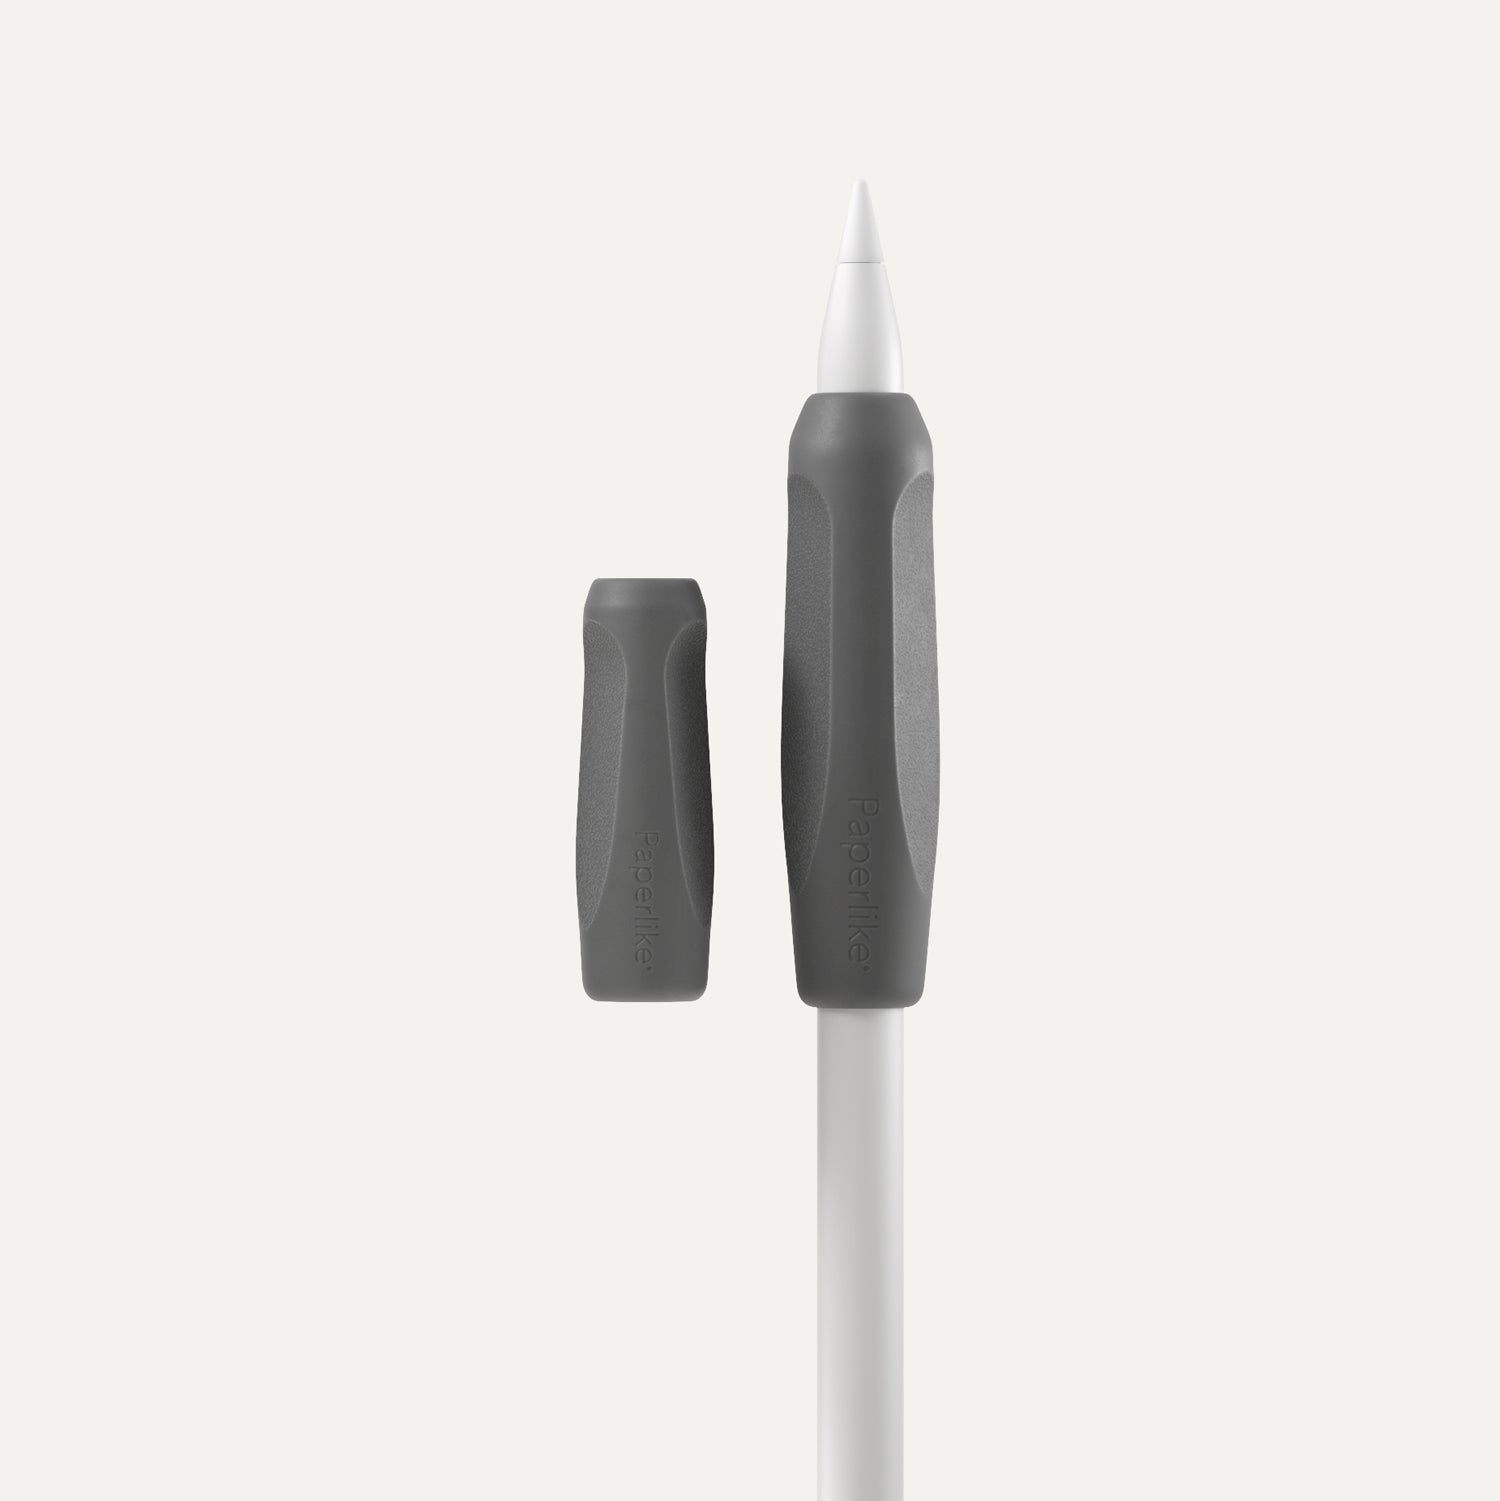 Charcoal pencil grips with Apple pencil